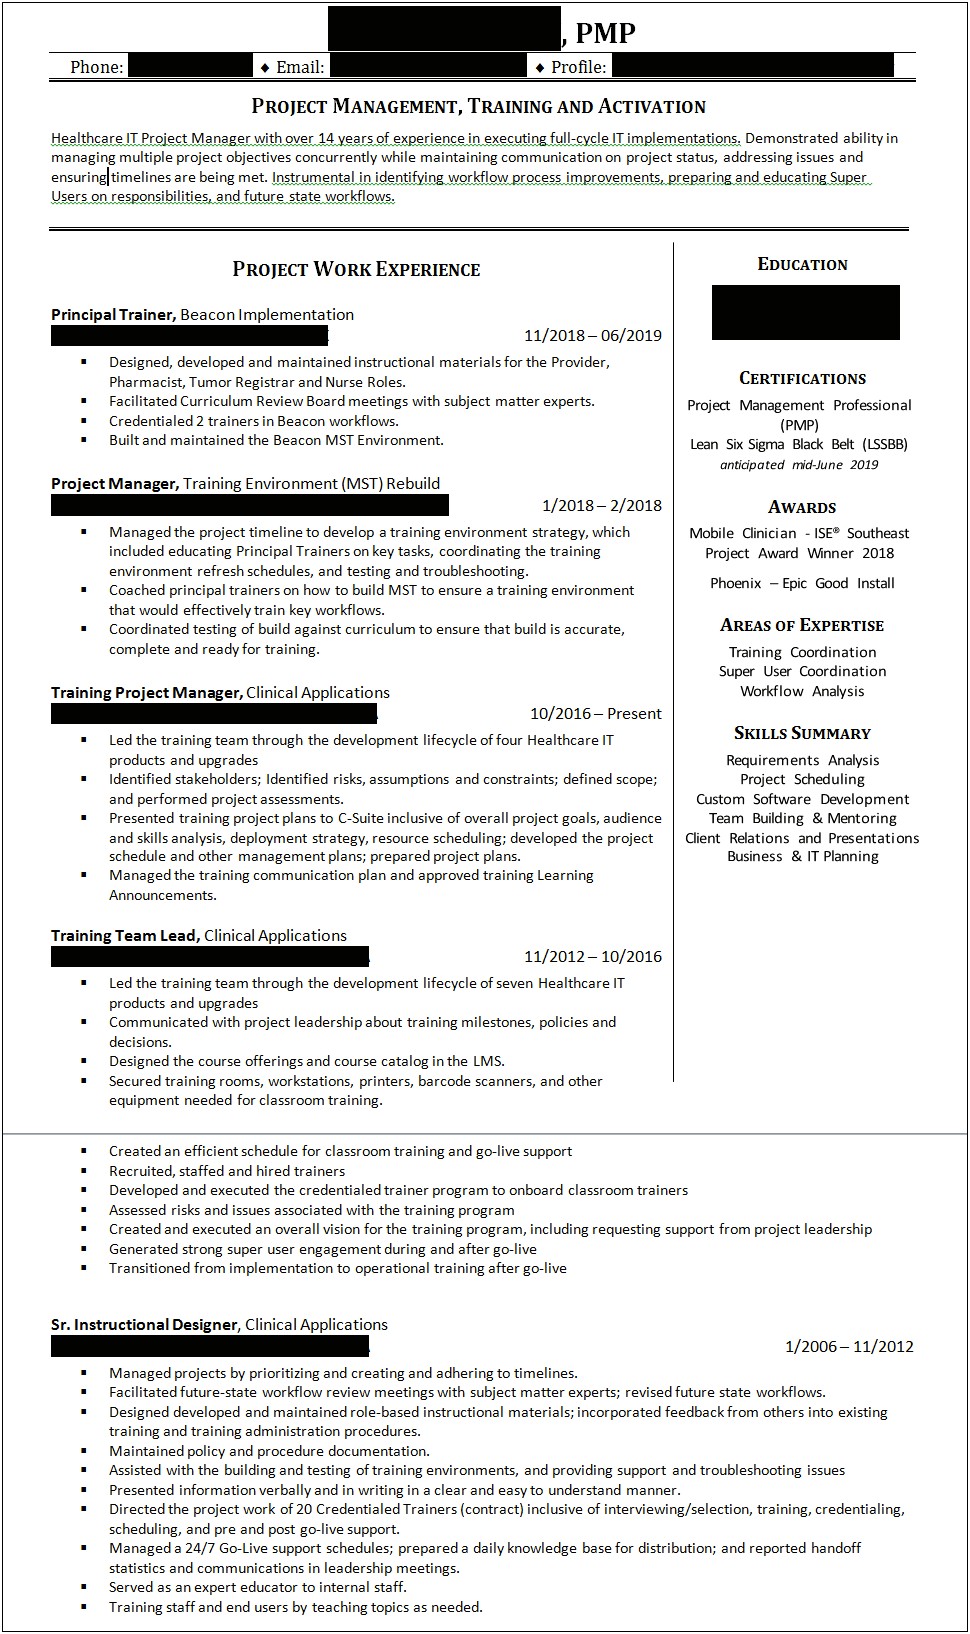 Amazing Pmp Construction Project Manager Resumes